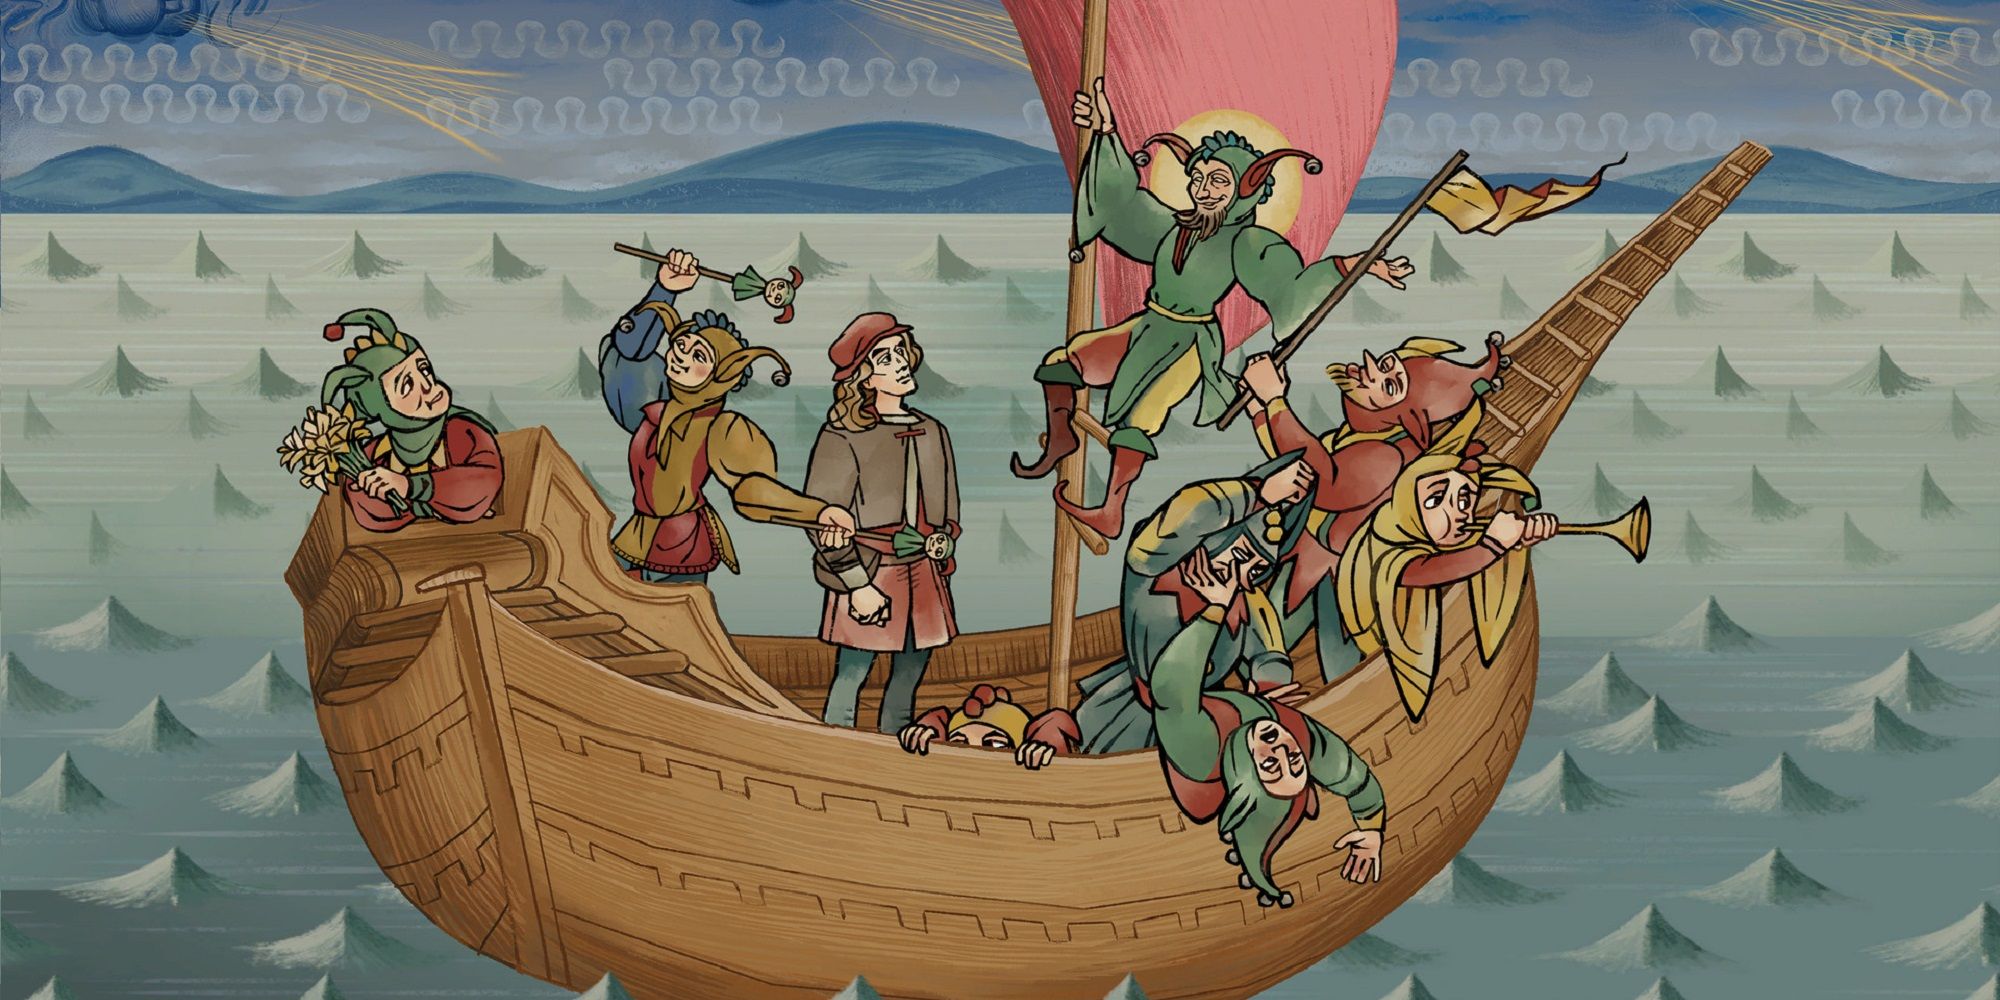 Pentiment screen showing a ship with several clowns